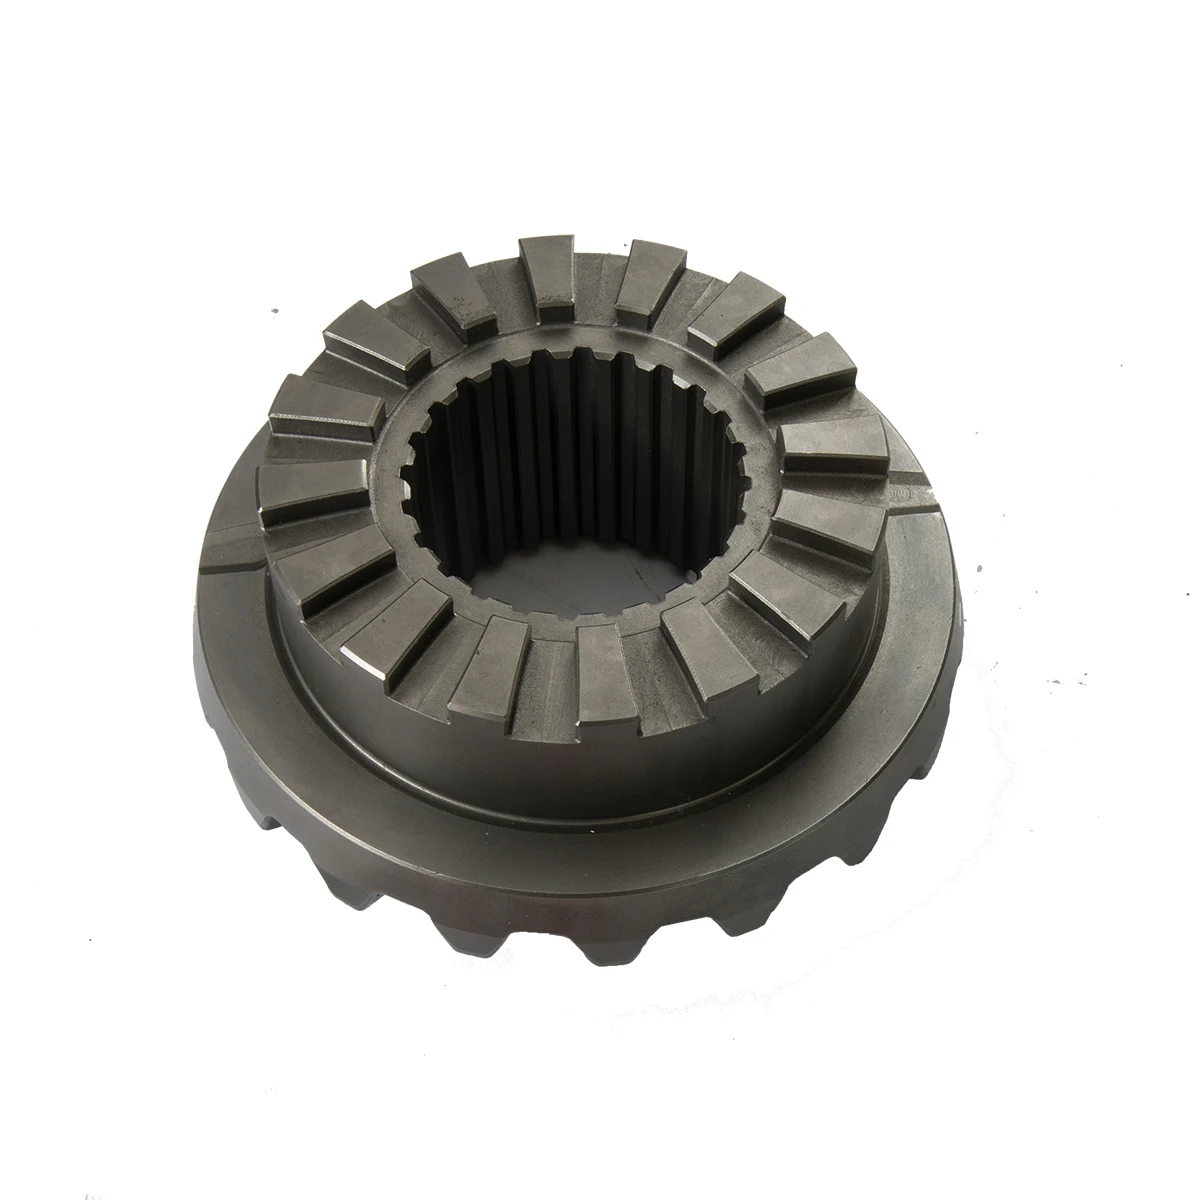 Manufacturer Europe truck welding truck differential assembly gears spider shaft differential housing case